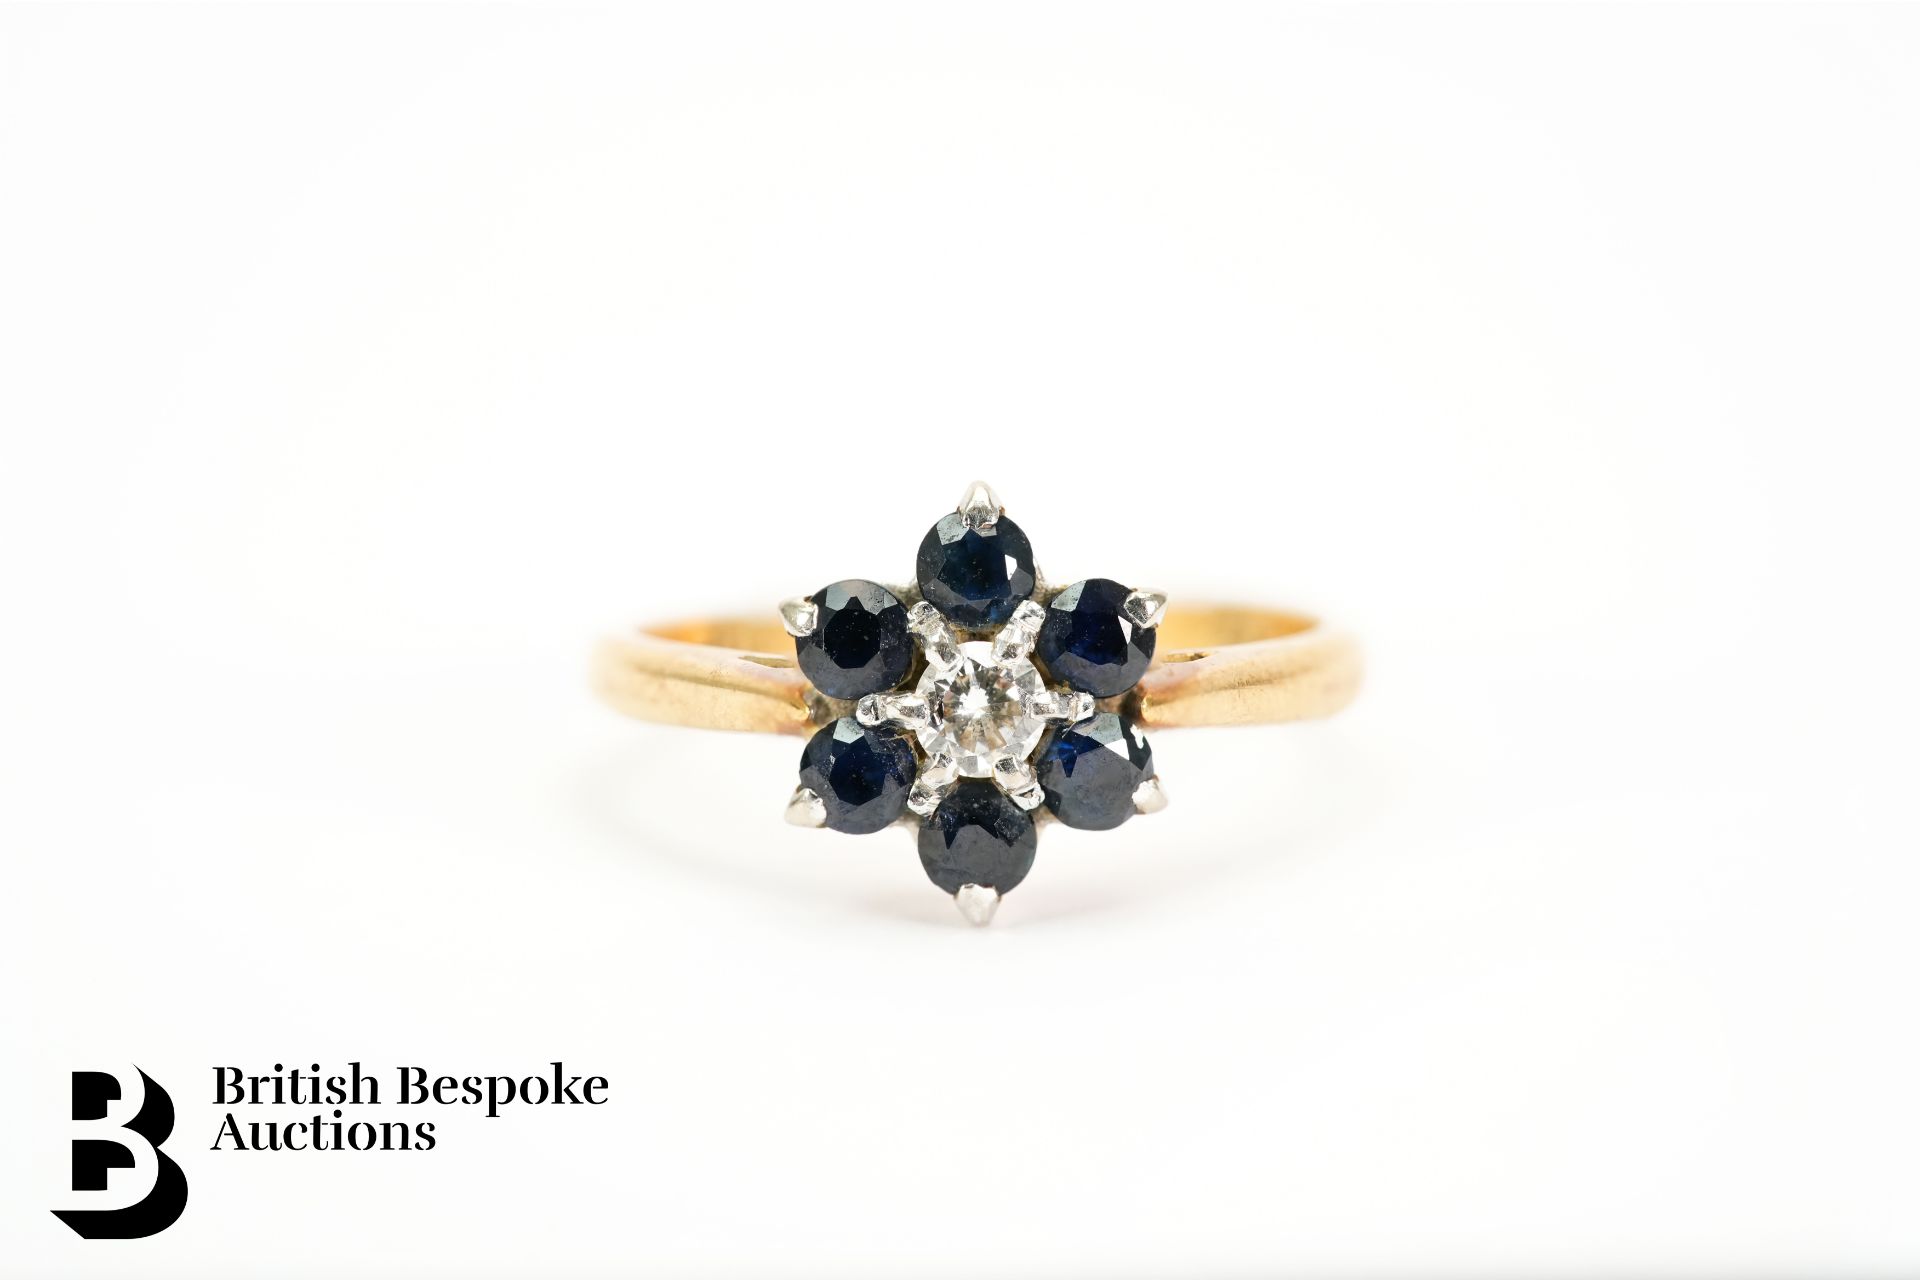 18ct Yellow Gold Sapphire and Diamond Ring - Image 2 of 2